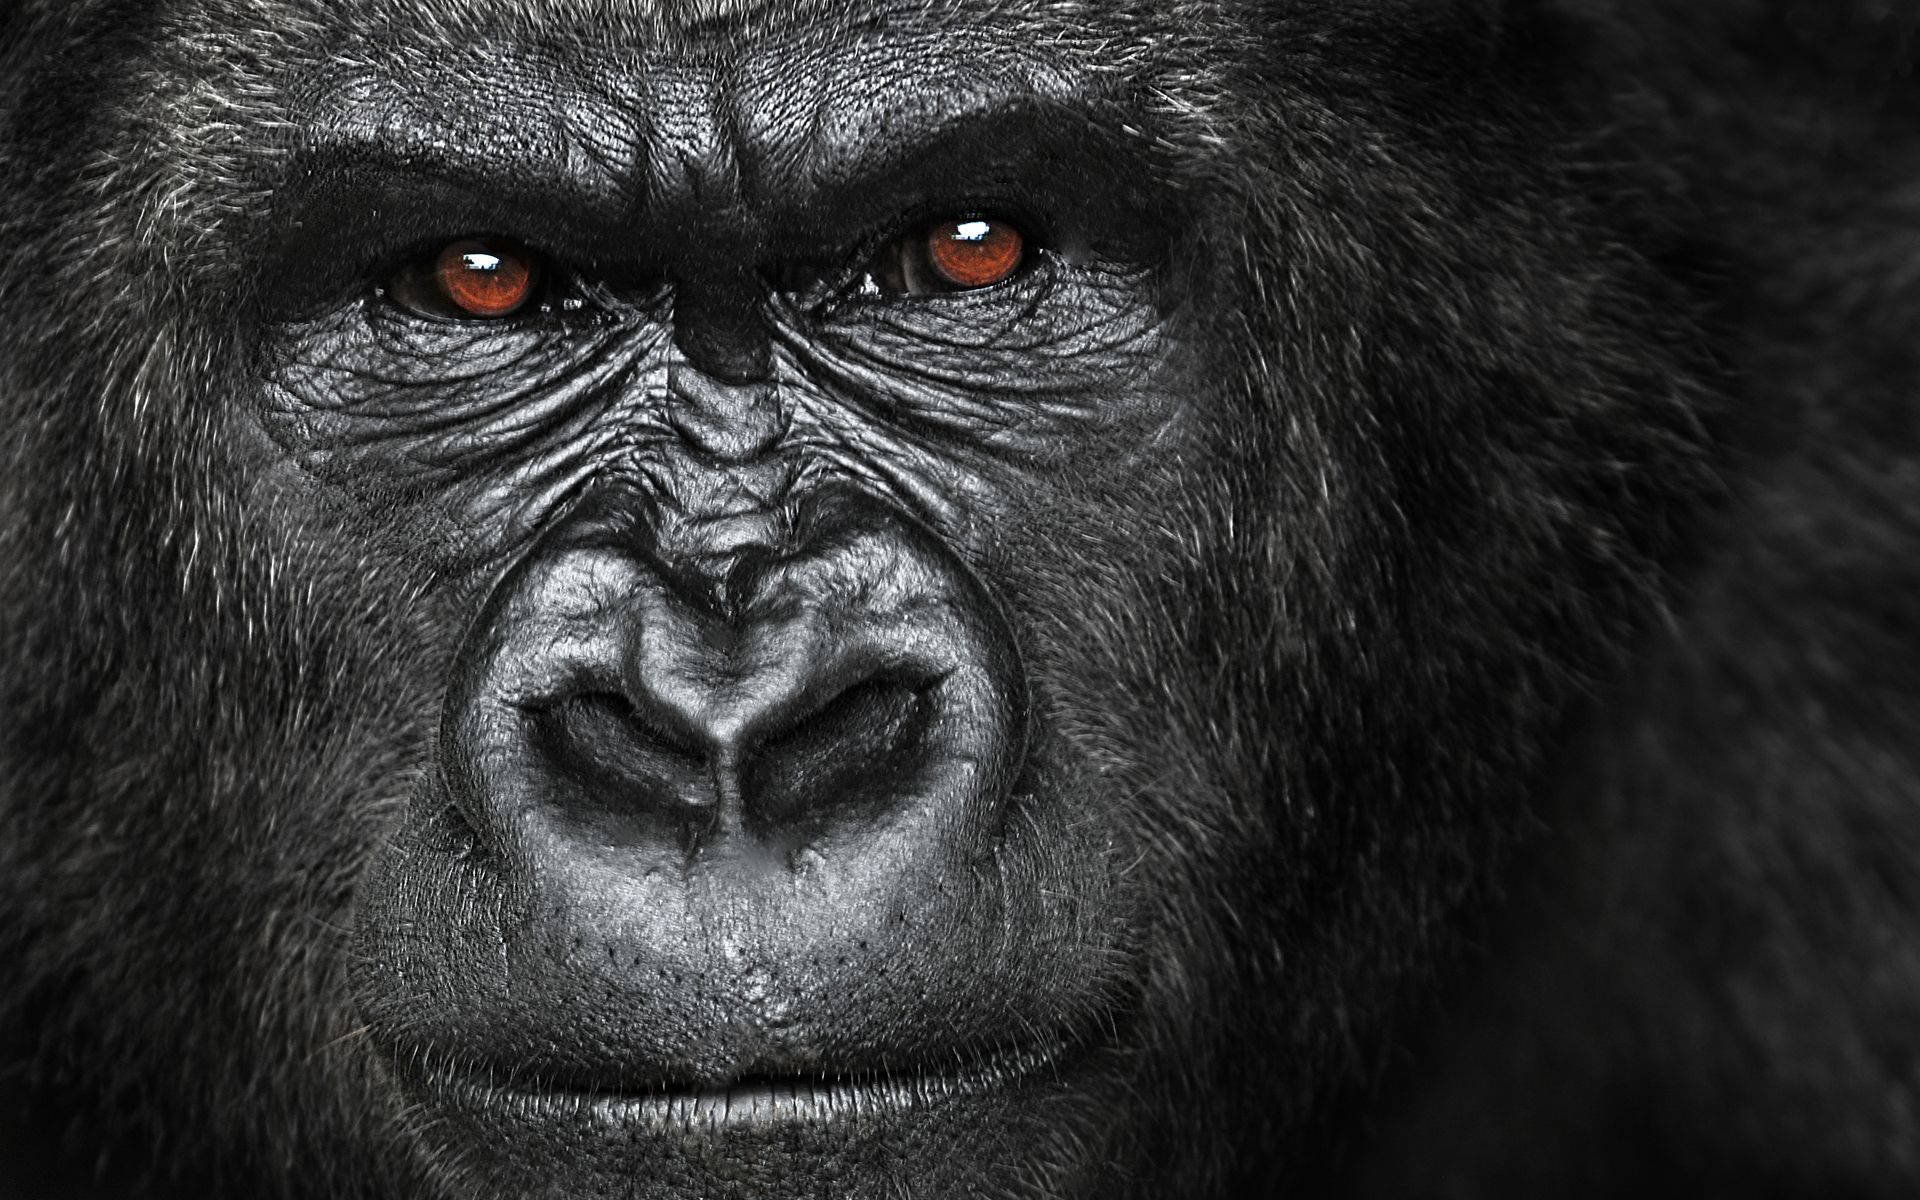 Gorilla's Intelligent And Calculating Eyes